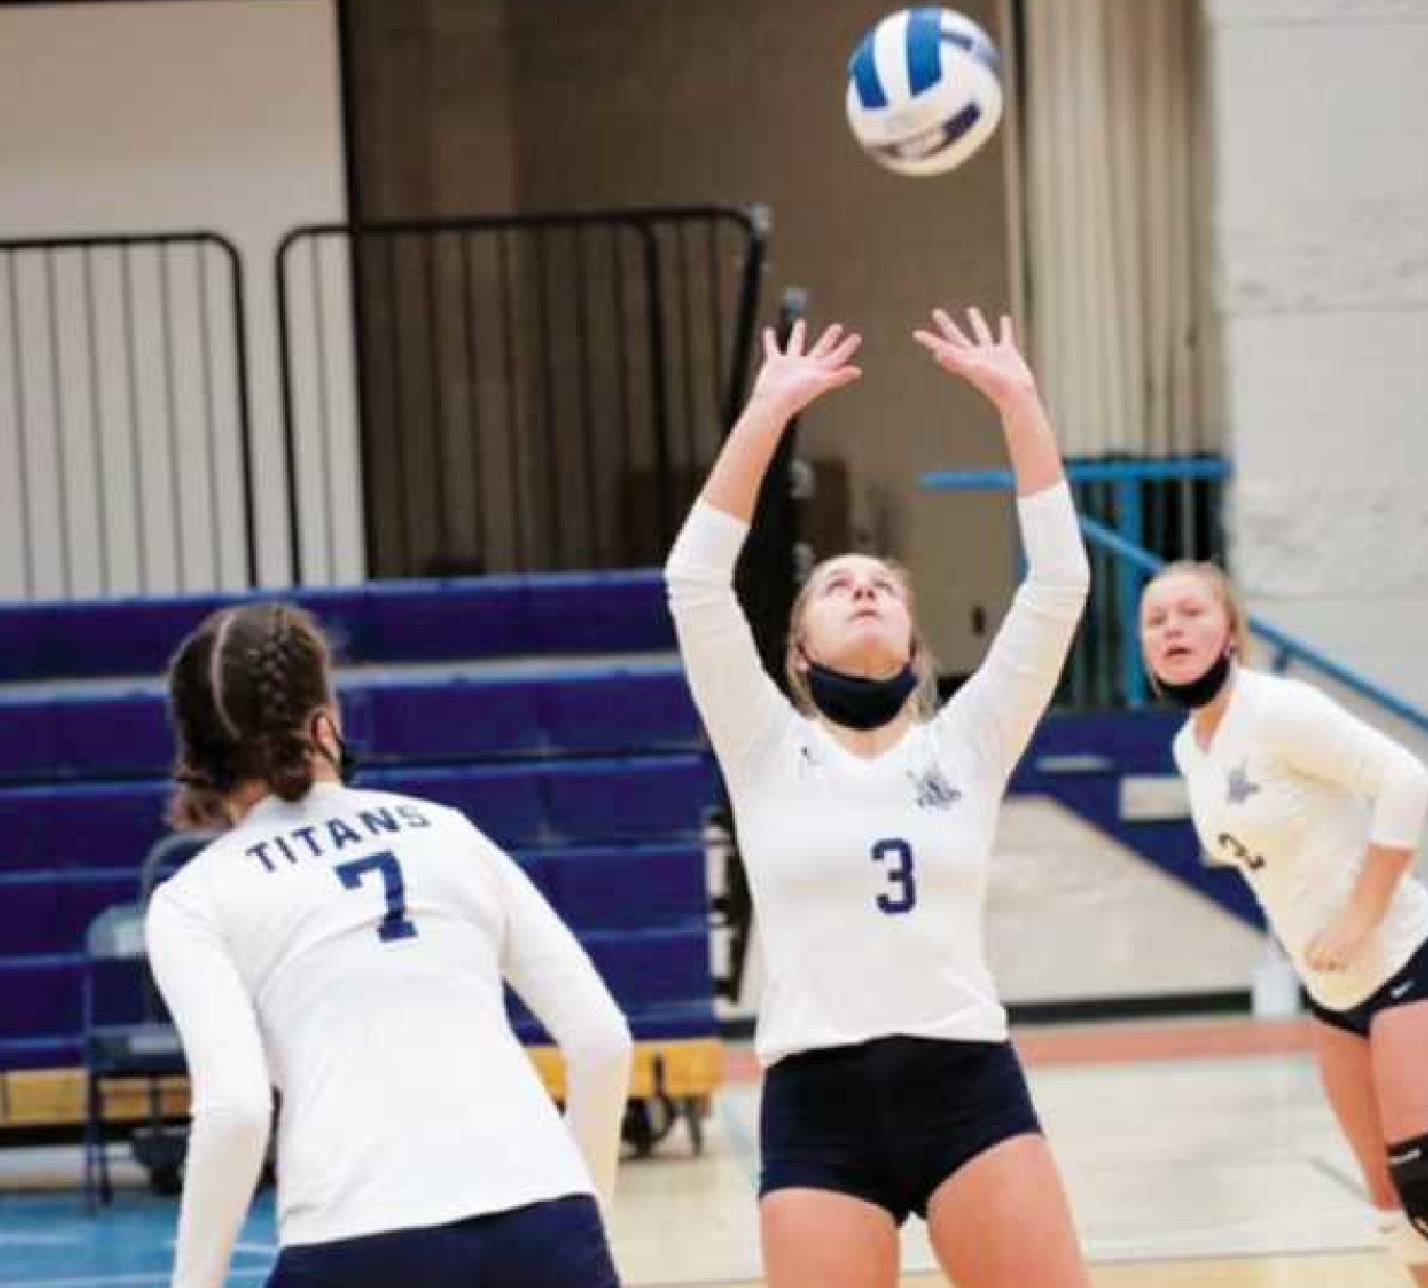 Durco plays in NJCAA national volleyball championship tournament with